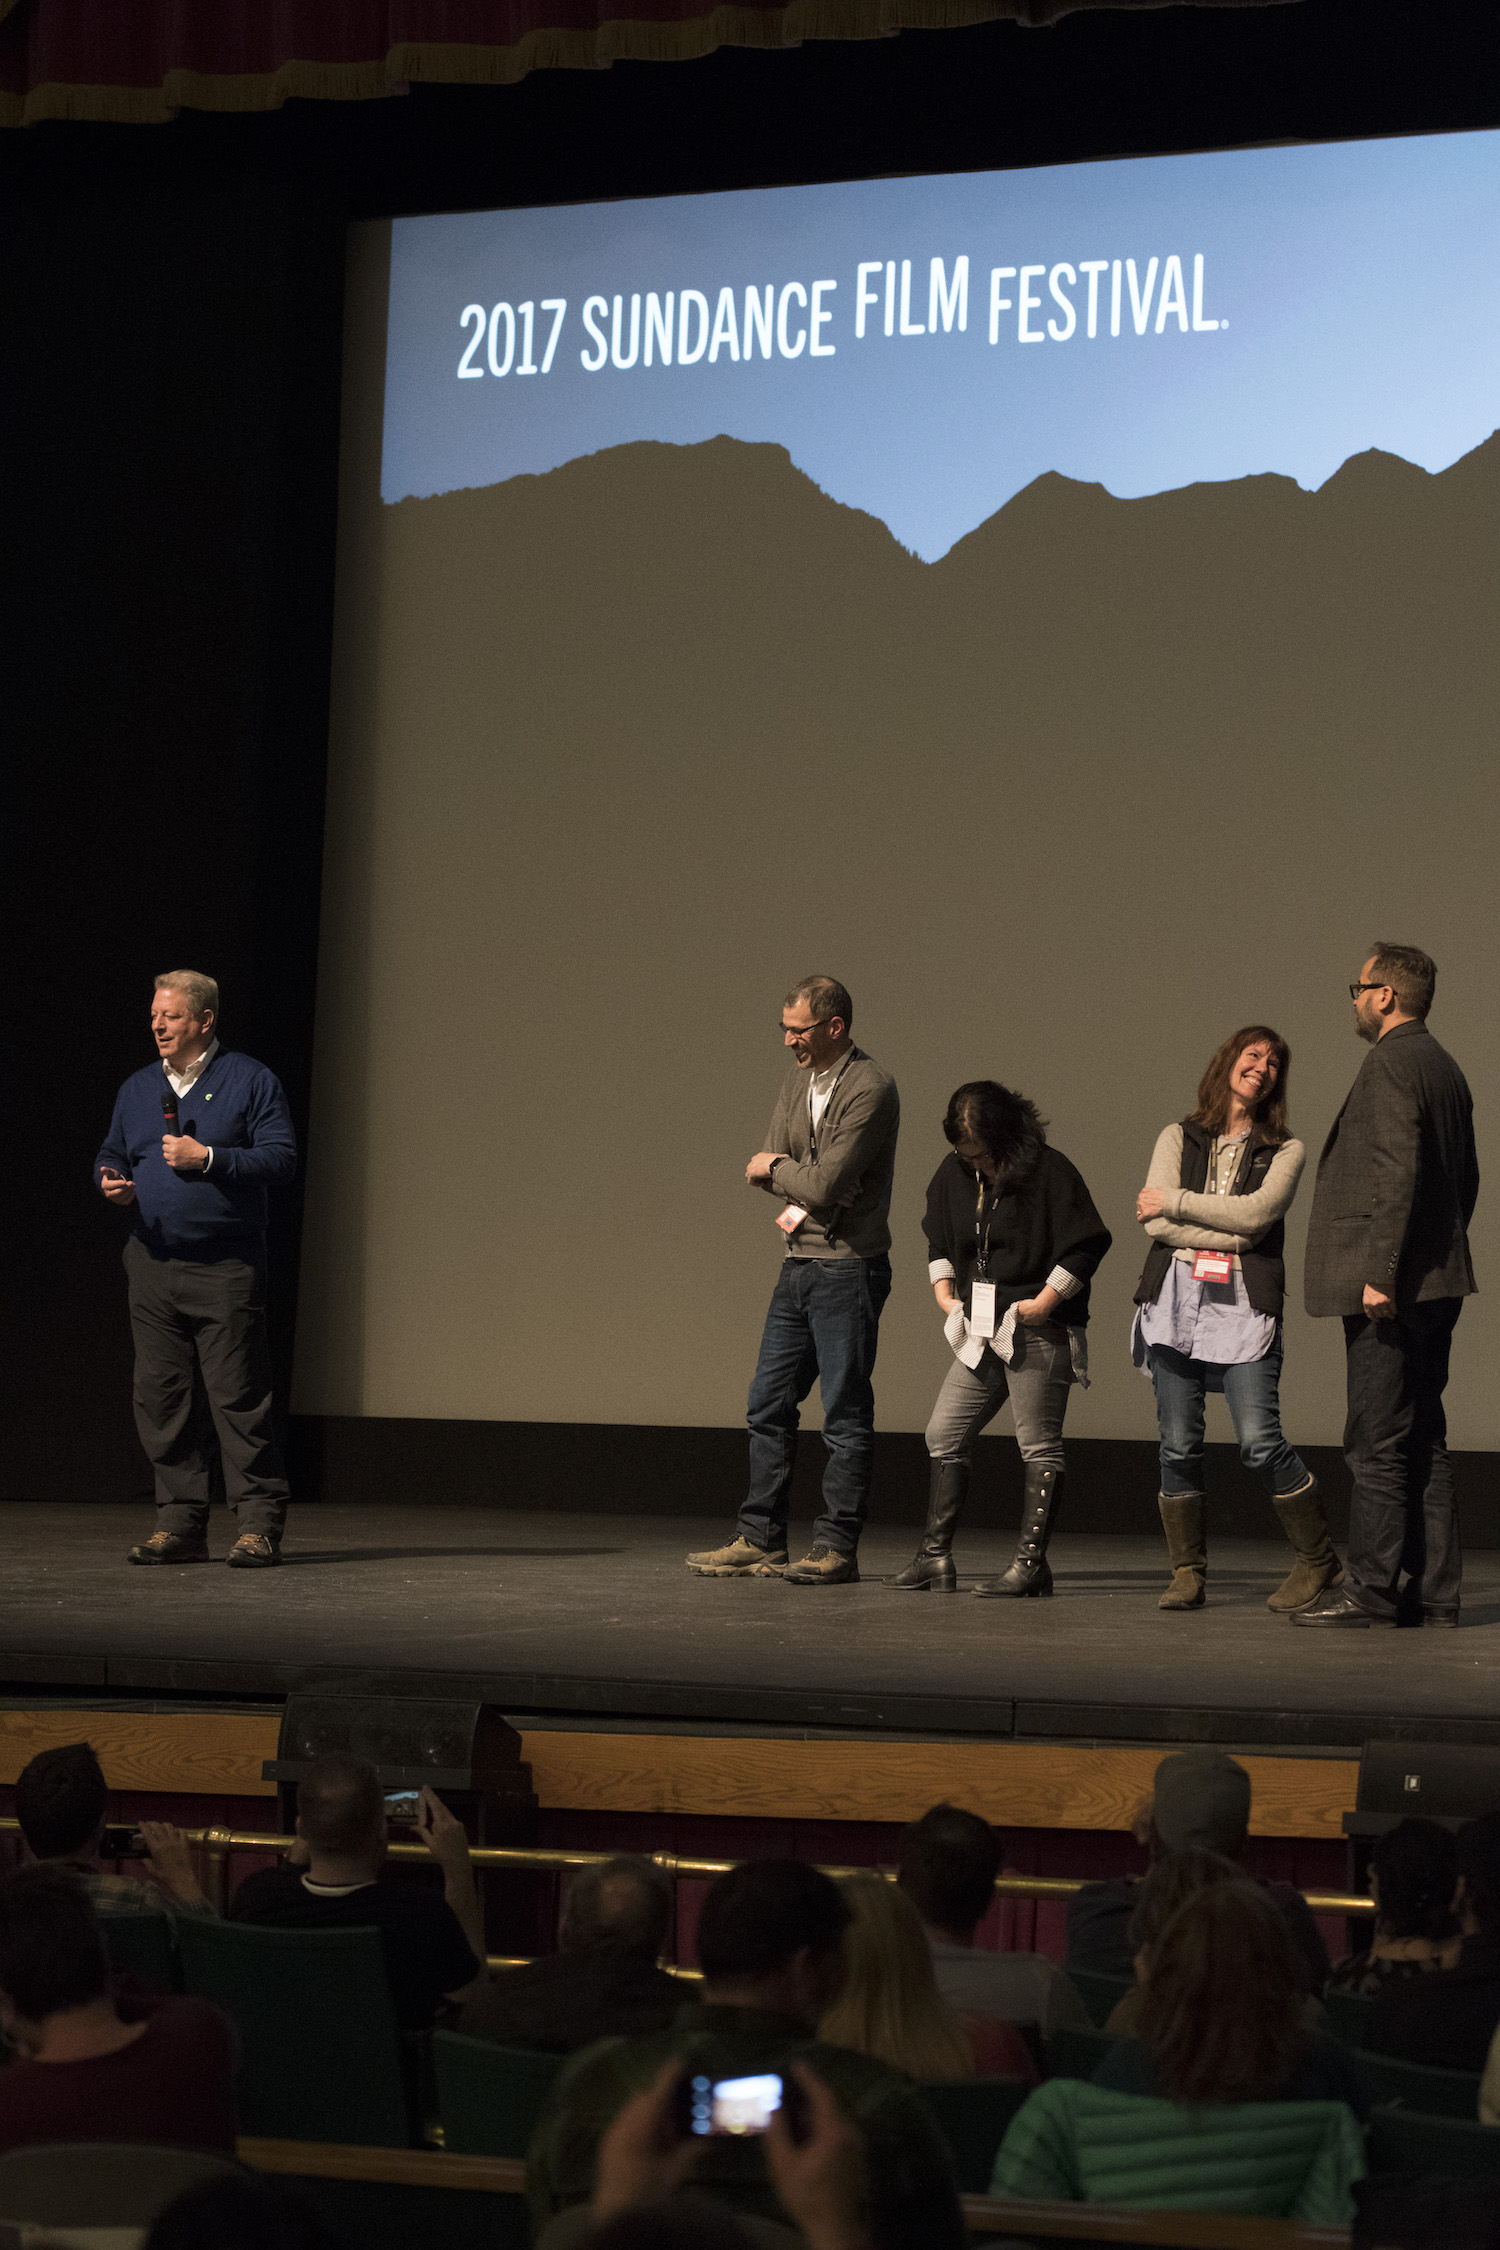 Former Vice President Al Gore visited the Grand Theatre stage for the 2017 Sundance Film Festival.